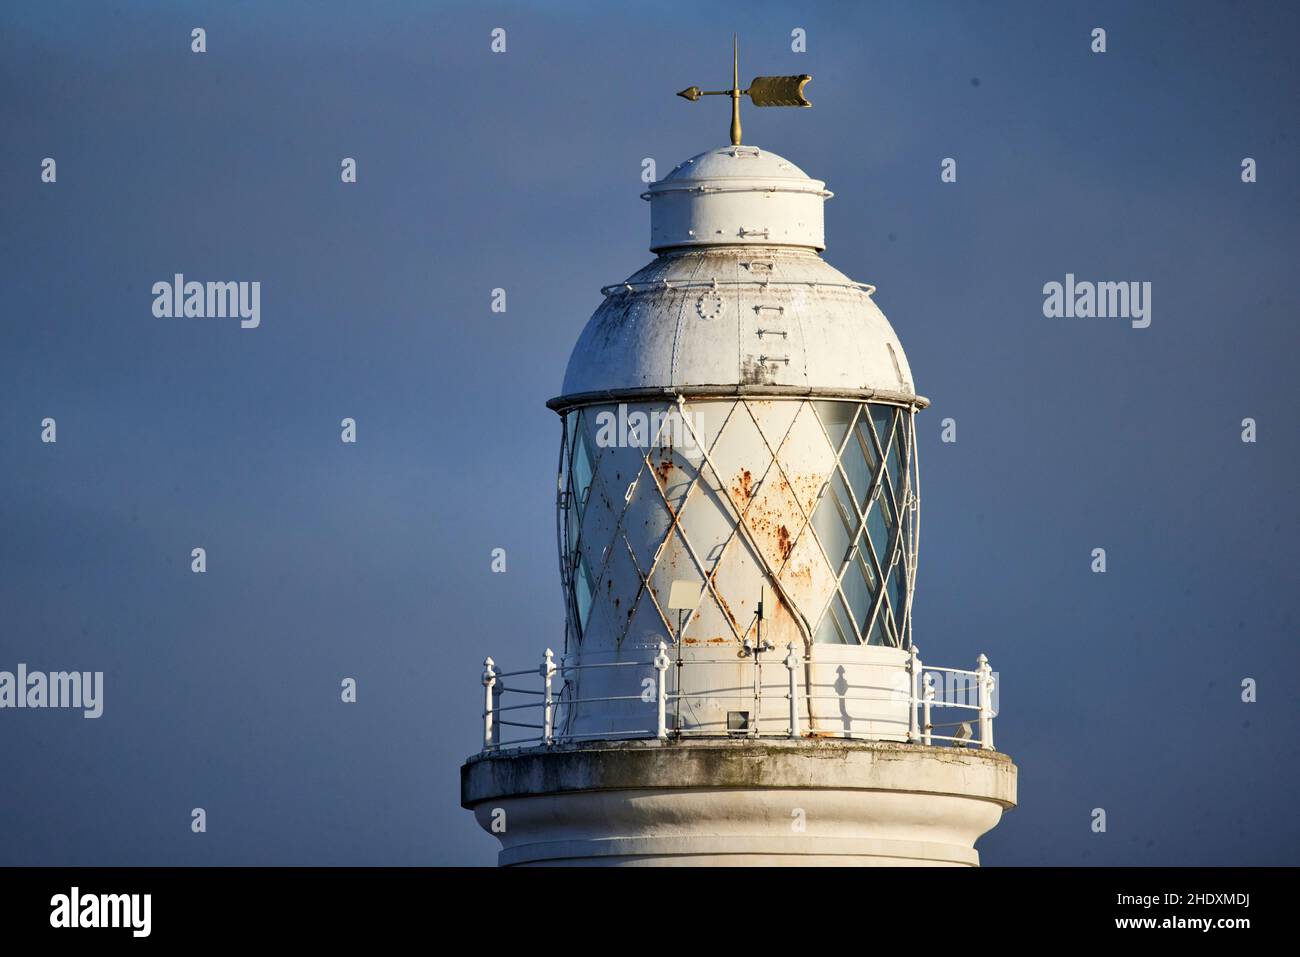 St. Mary's Lighthouse Whitley Bay, a seaside town in North Tyneside, Tyne & Wear, England Stock Photo